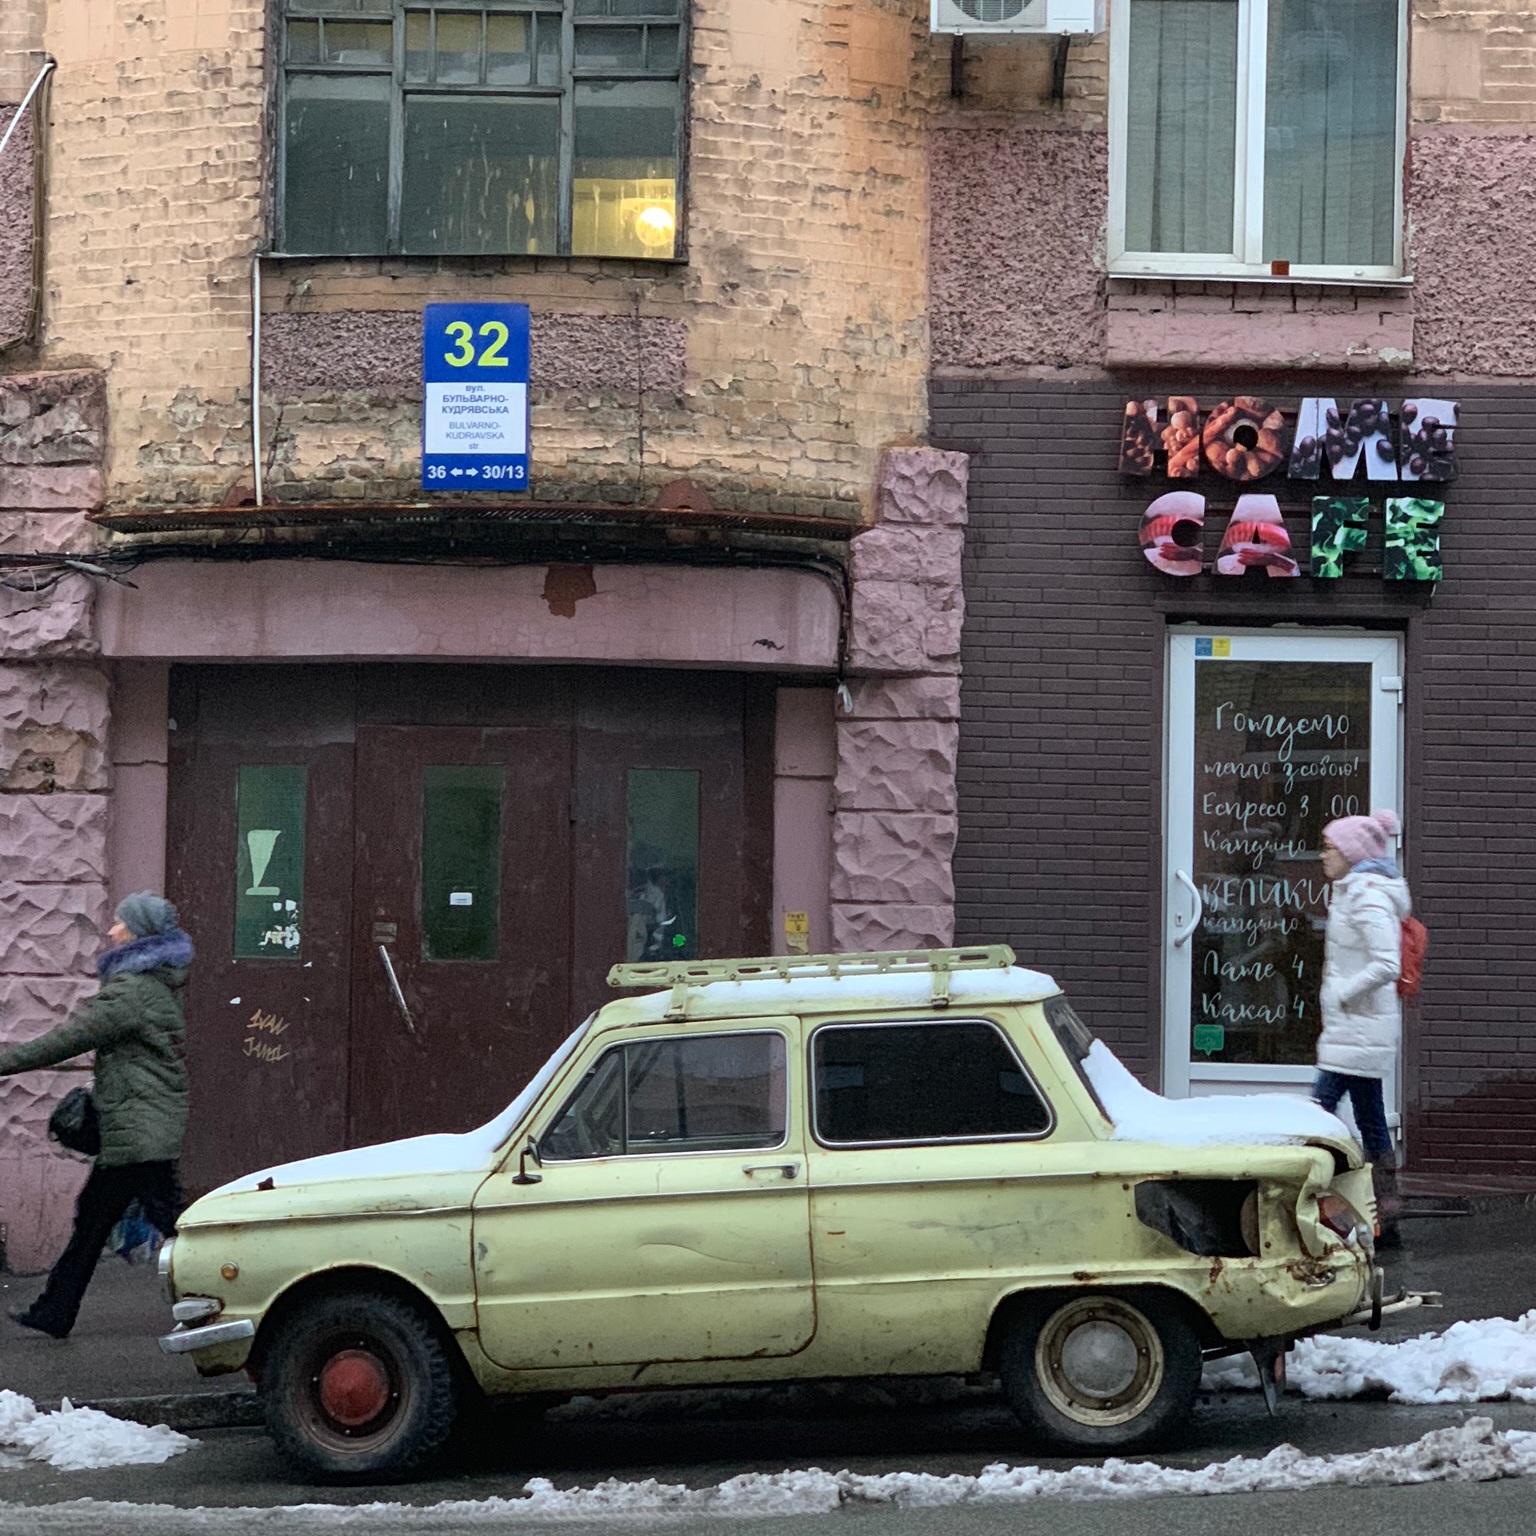 Old car next to new cafe. Stark contrasts here.